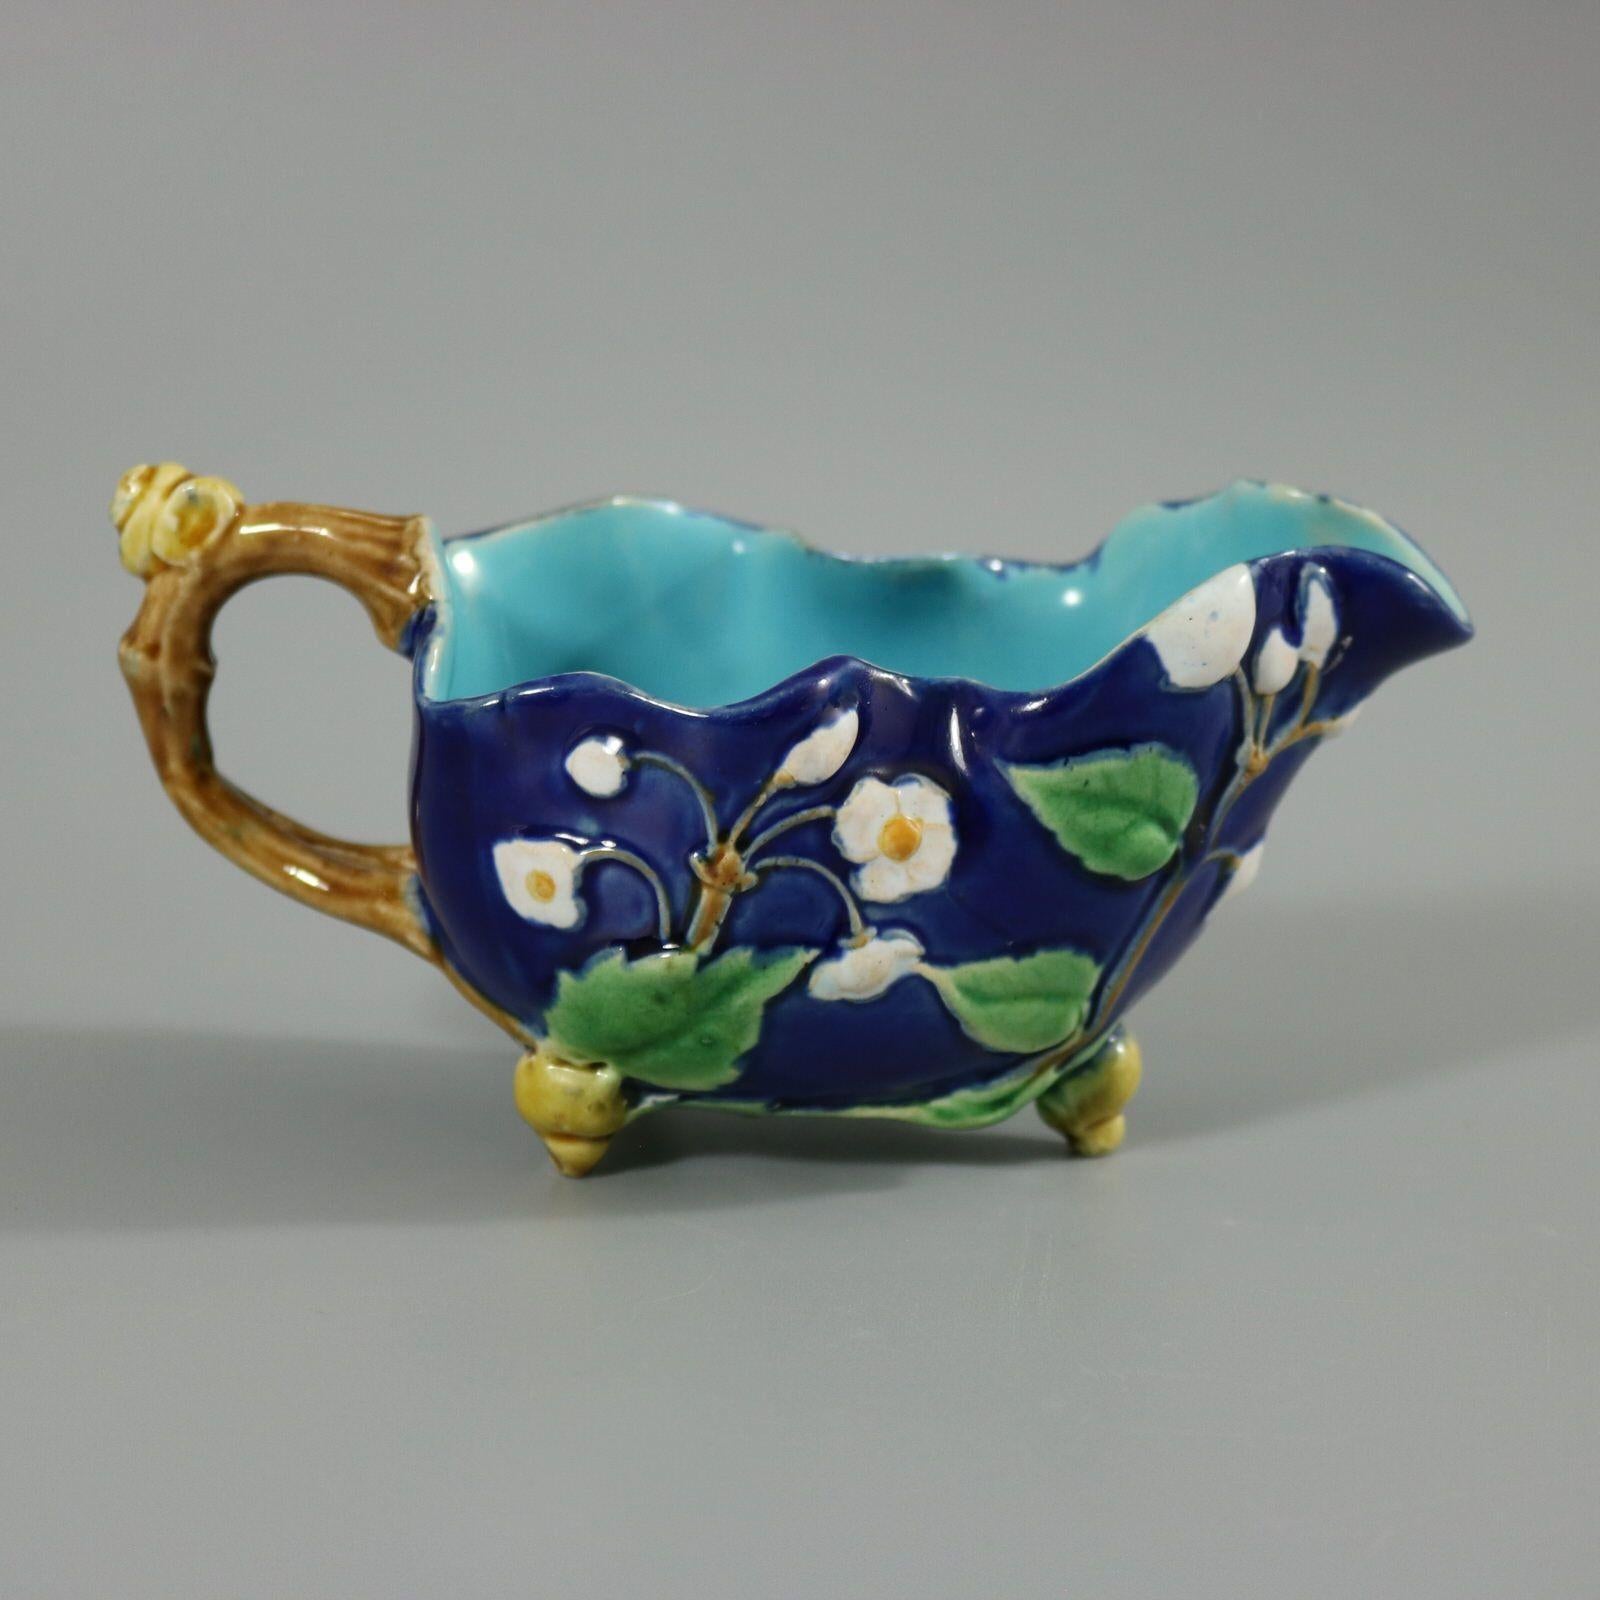 Minton Majolica Cream Jug with Snail Handle In Excellent Condition For Sale In Chelmsford, Essex